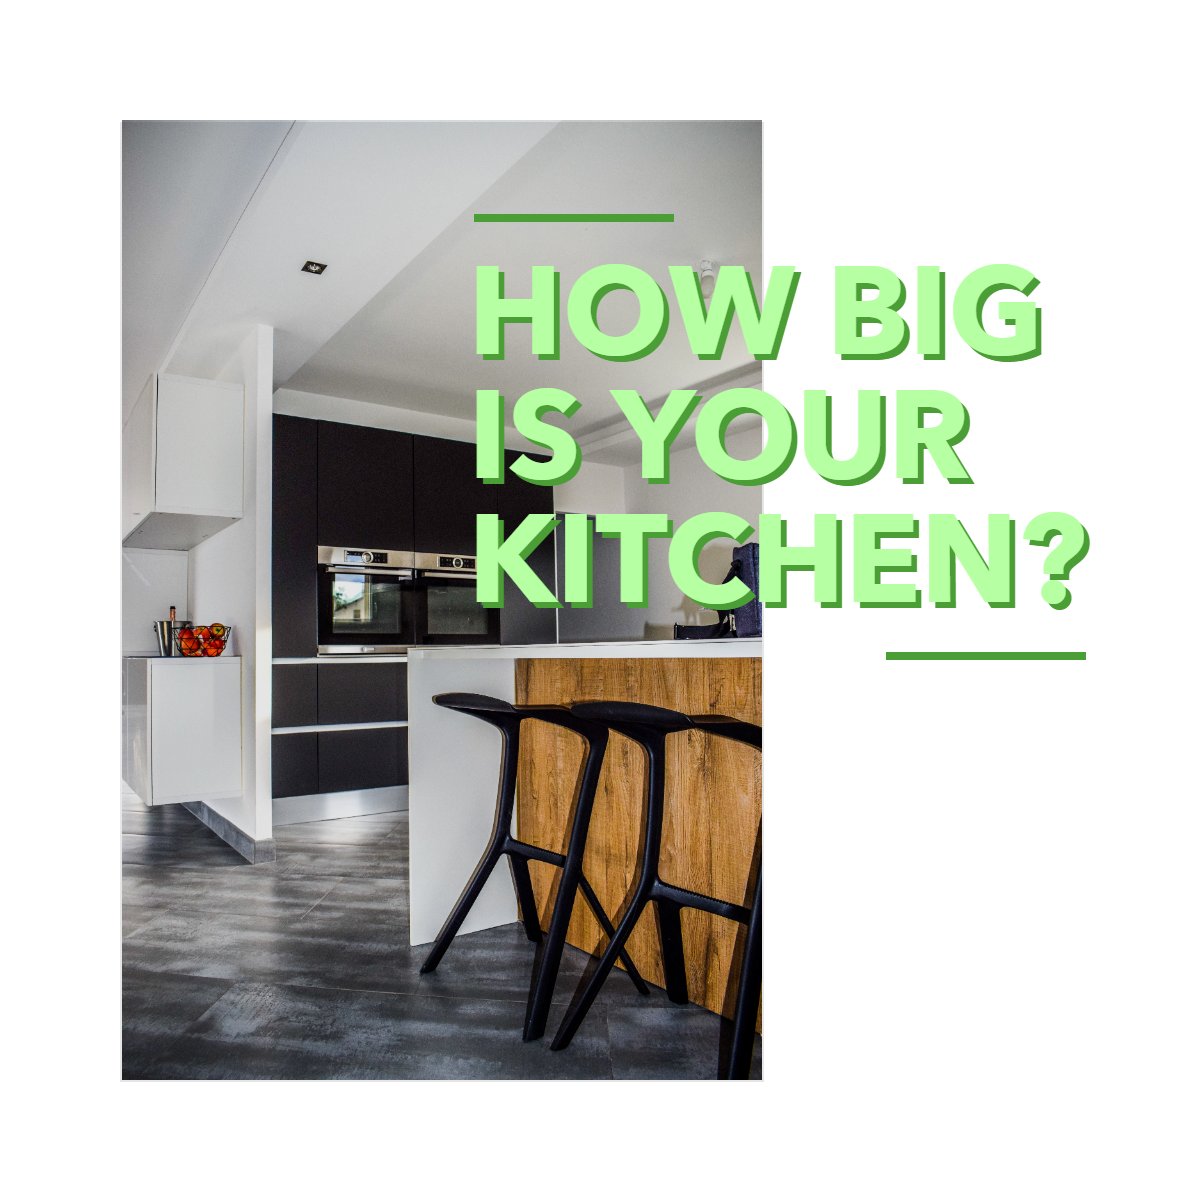 In the US the average Kitchen size for single homes is 161 square feet 😲

How big is your kitchen Tell us in the comments!  👇

#realestate #kitchensize #kitchen #homes

 #cherylcitro